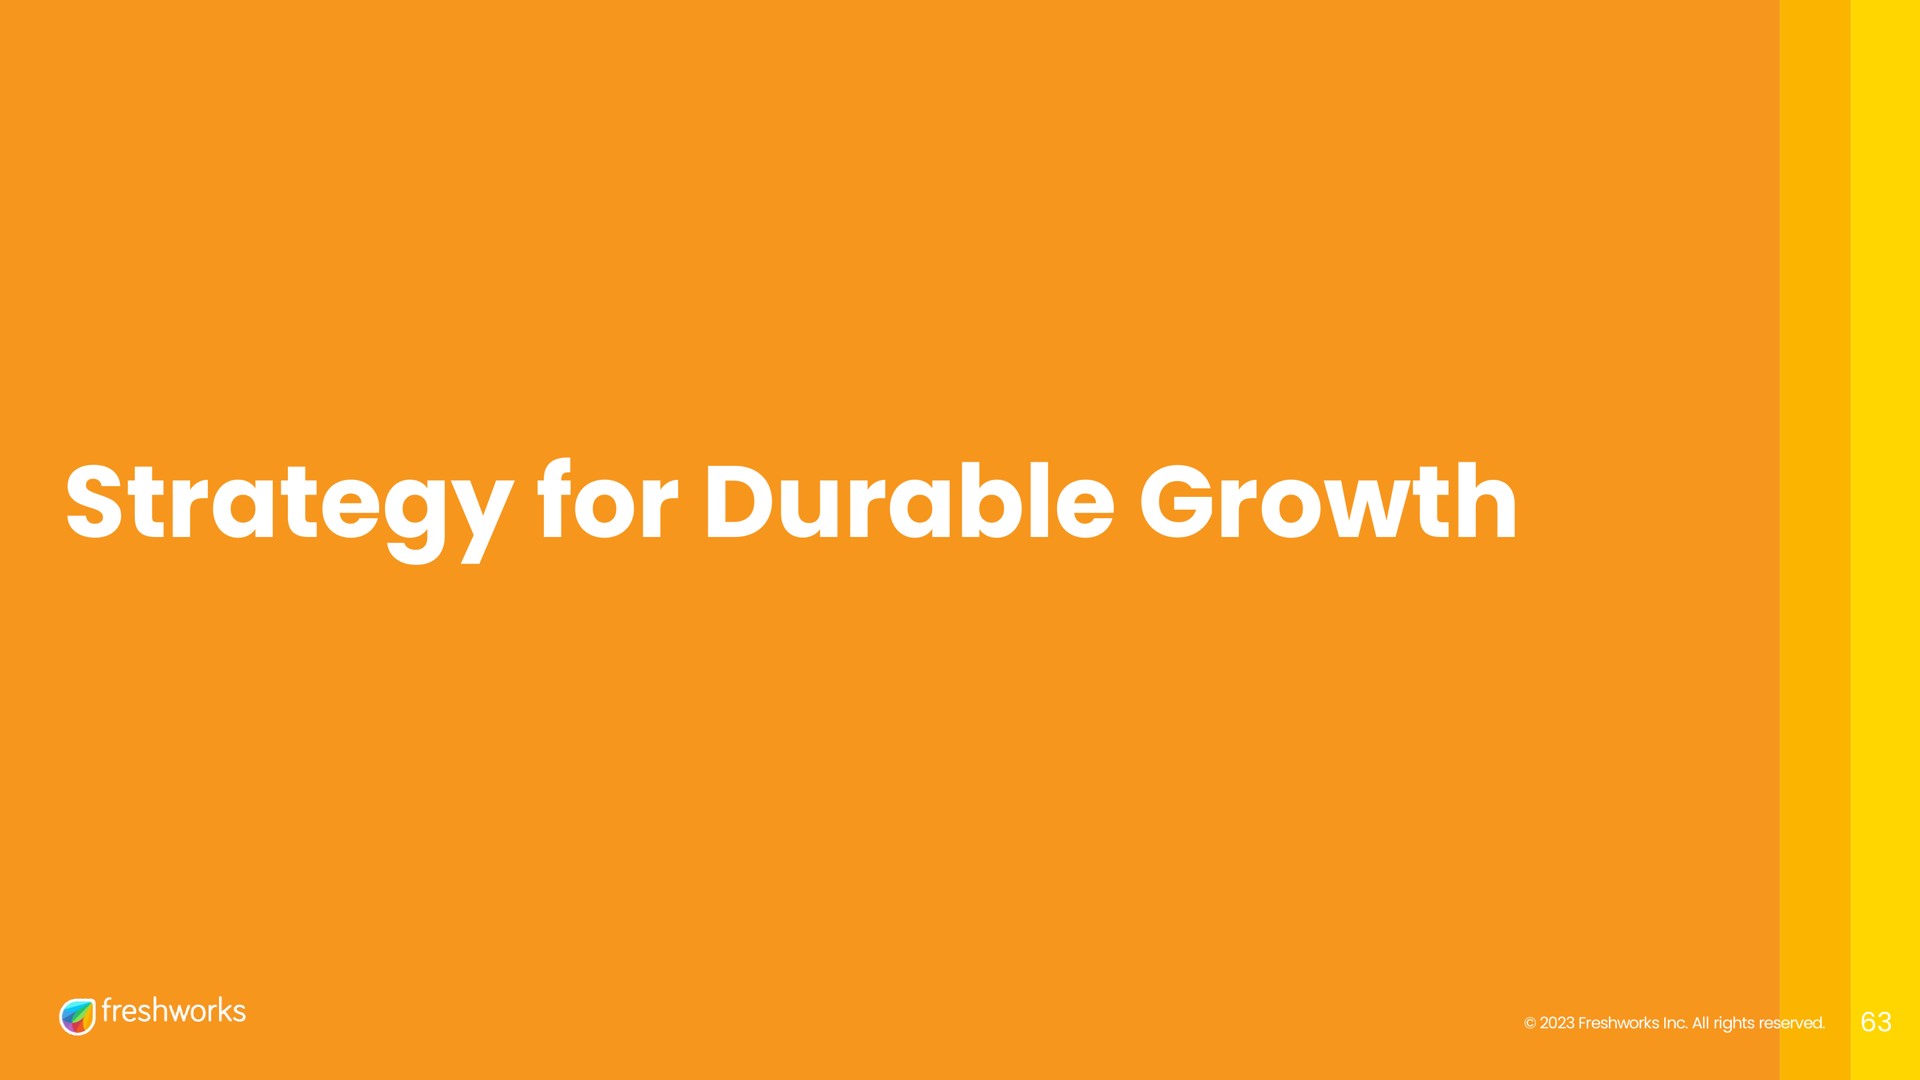 strategy for durable growth | Freshworks